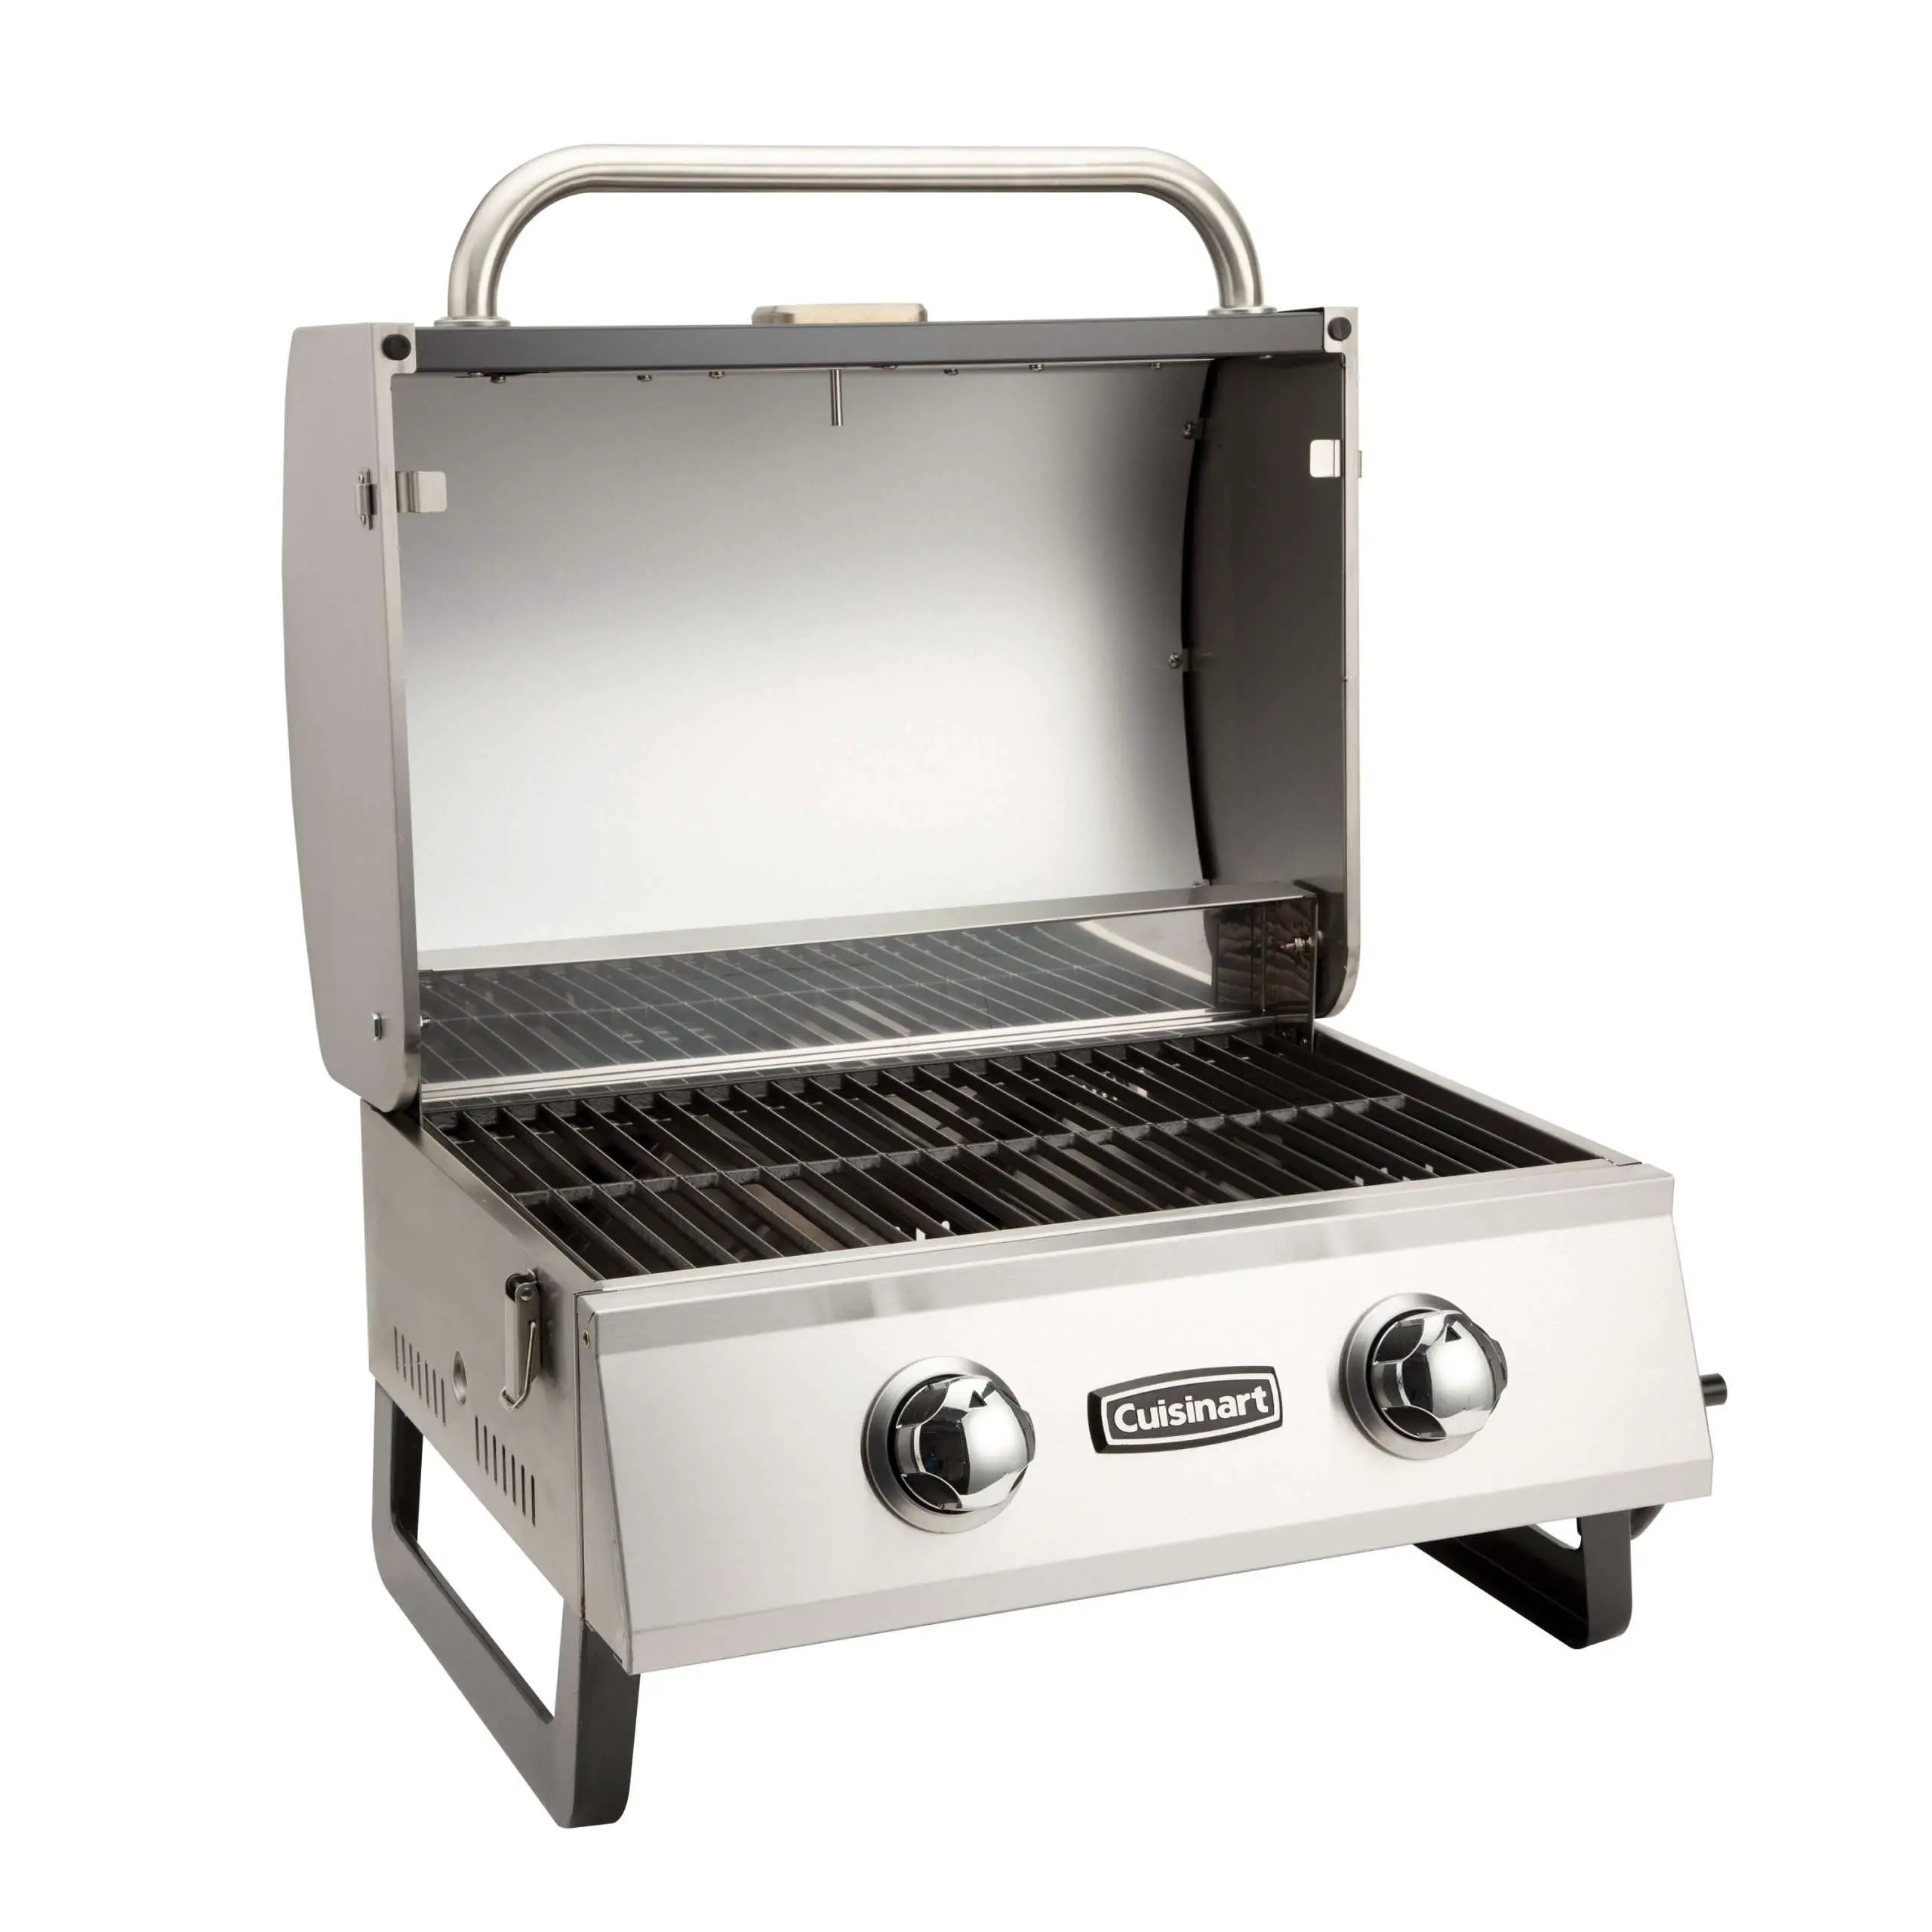 Cuisinart® Deluxe Two Burner Portable Gas Grill